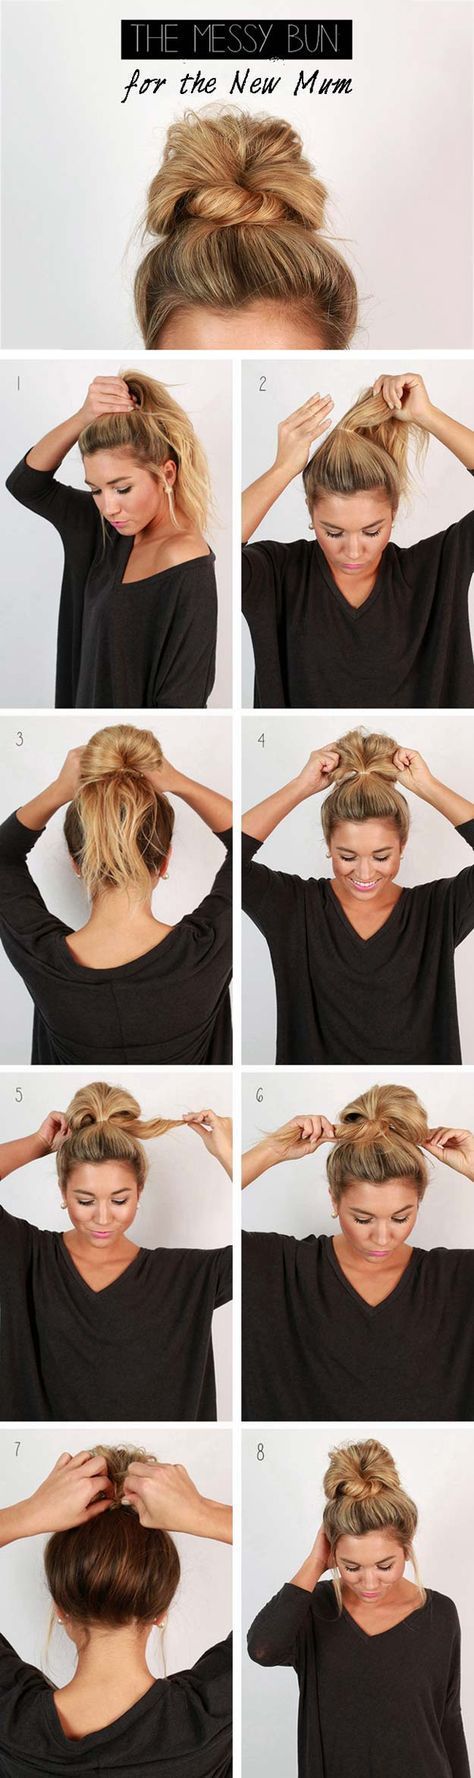 Cool and Easy DIY Hairstyles – Messy Bun – Quick and Easy Ideas for Back to School Styles for Medium, Short and Long Hair – Fun